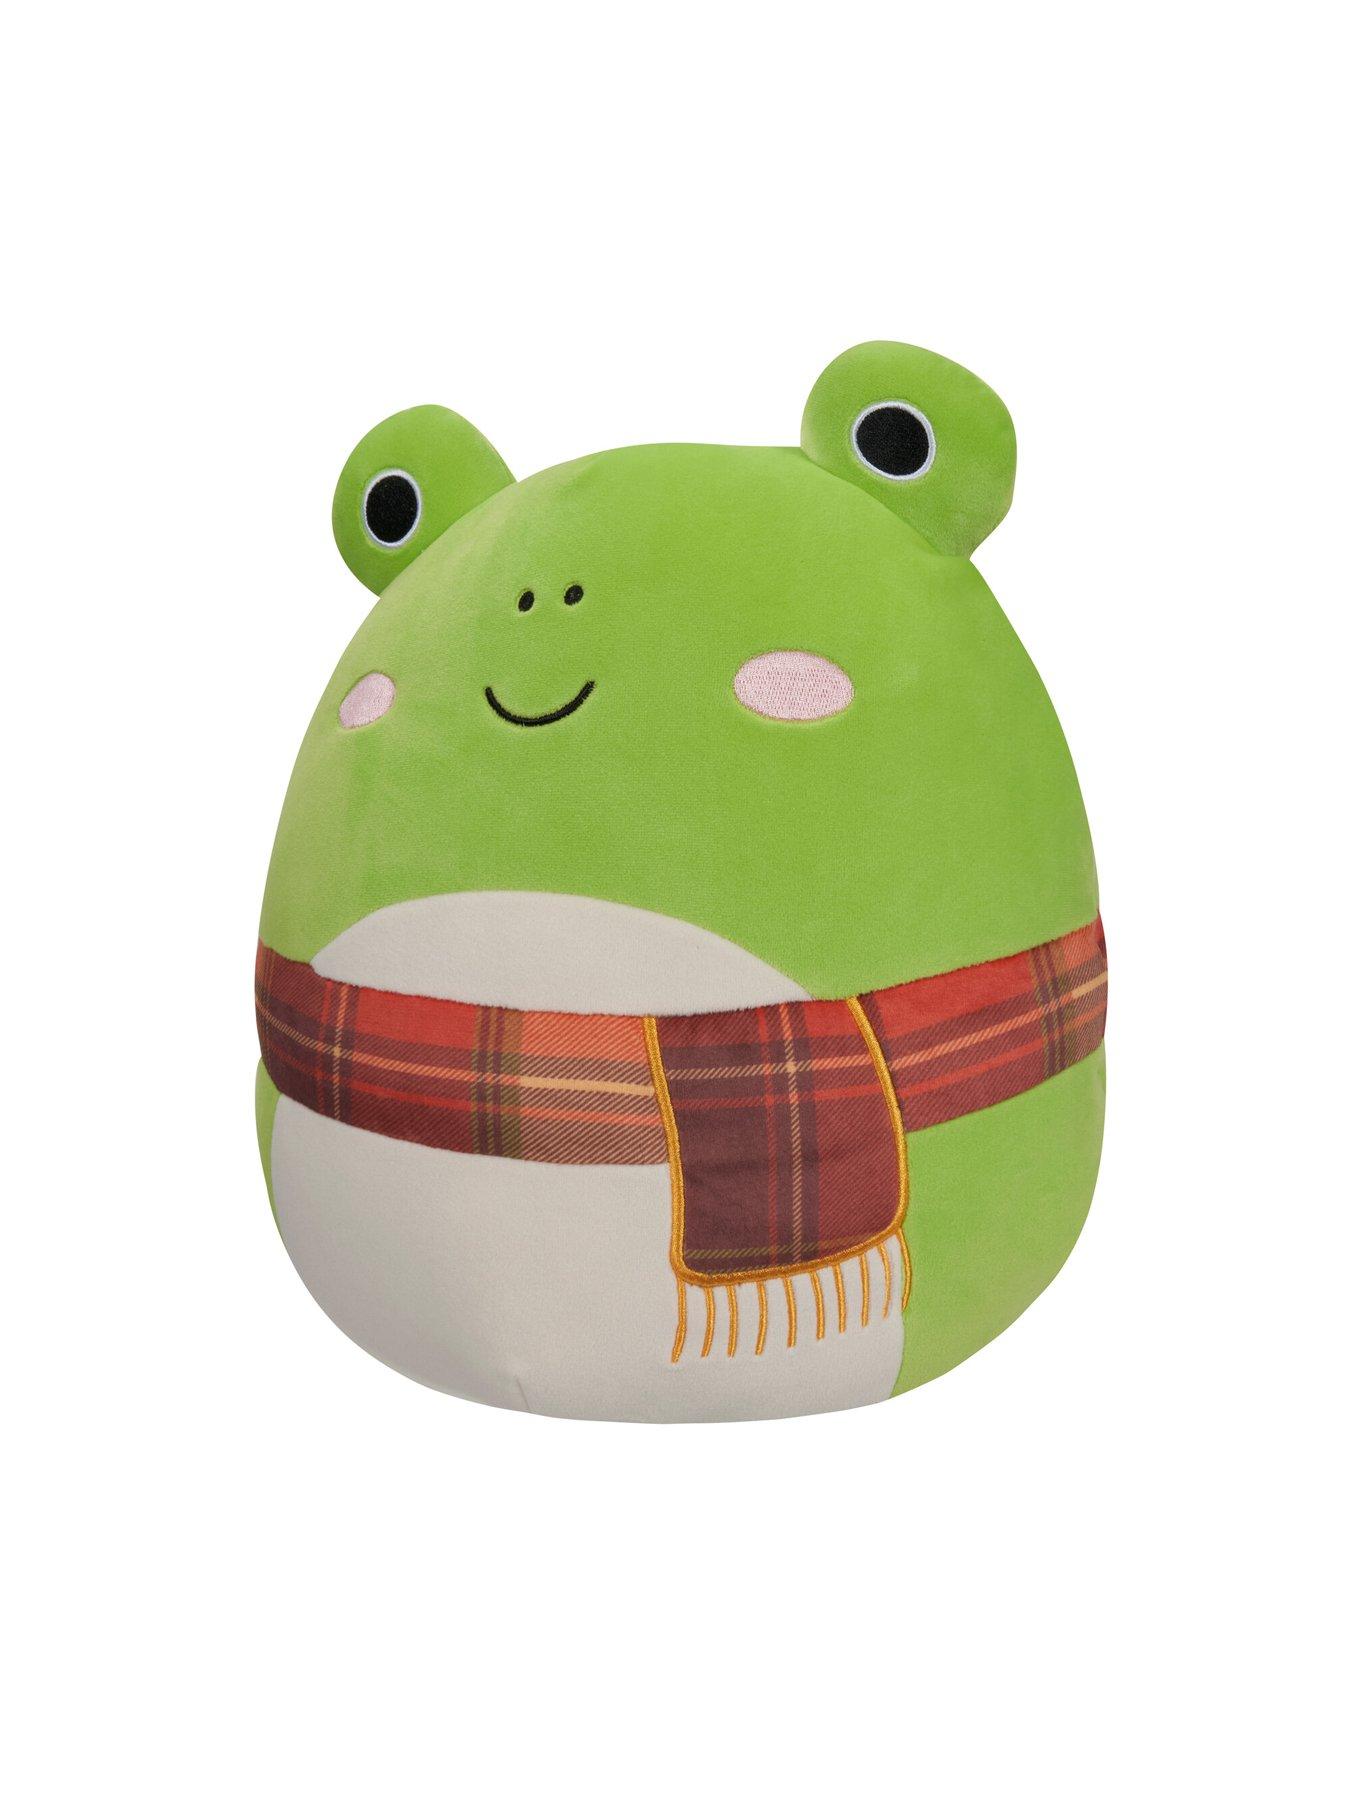 Original Squishmallows 12-Inch Wendy the Green Frog